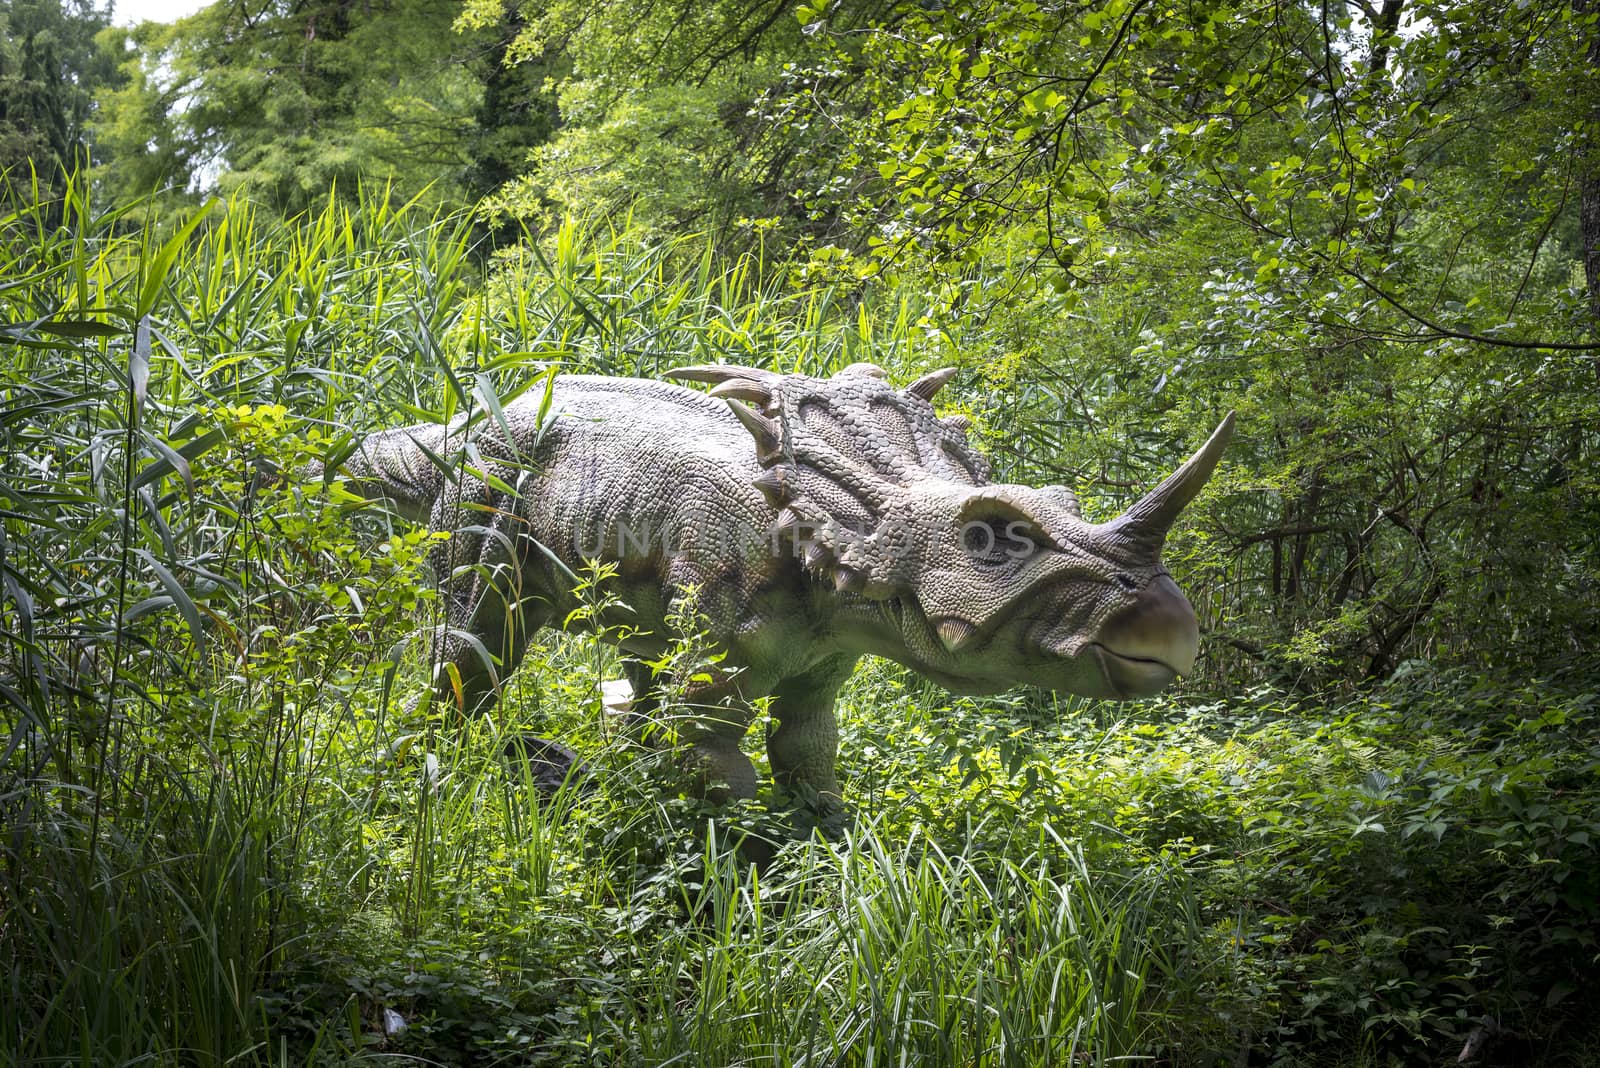 A dinosaur statue in a recreation park, greenery in background